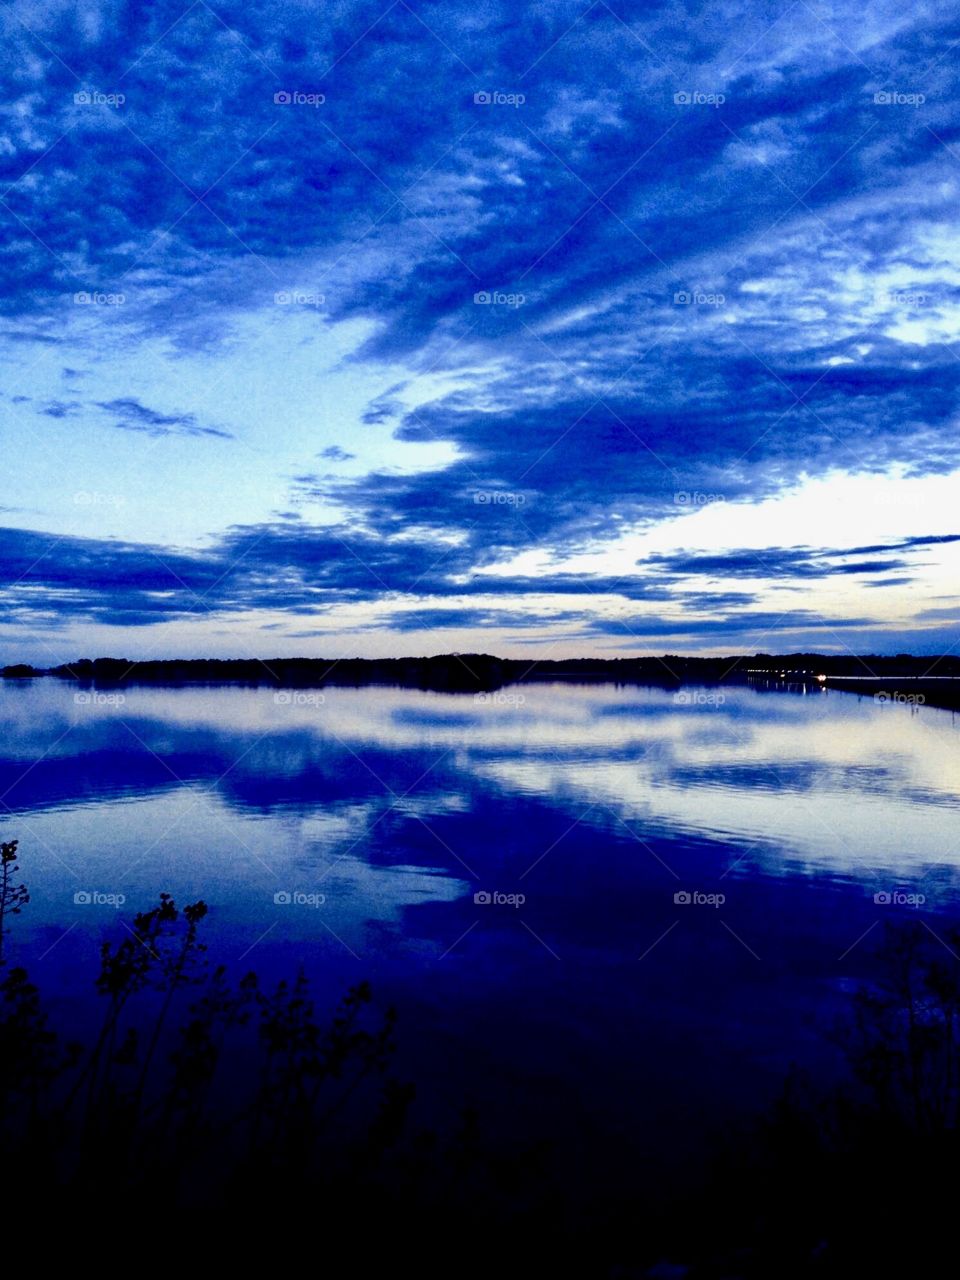 Vibrant clouds reflected in water at dusk